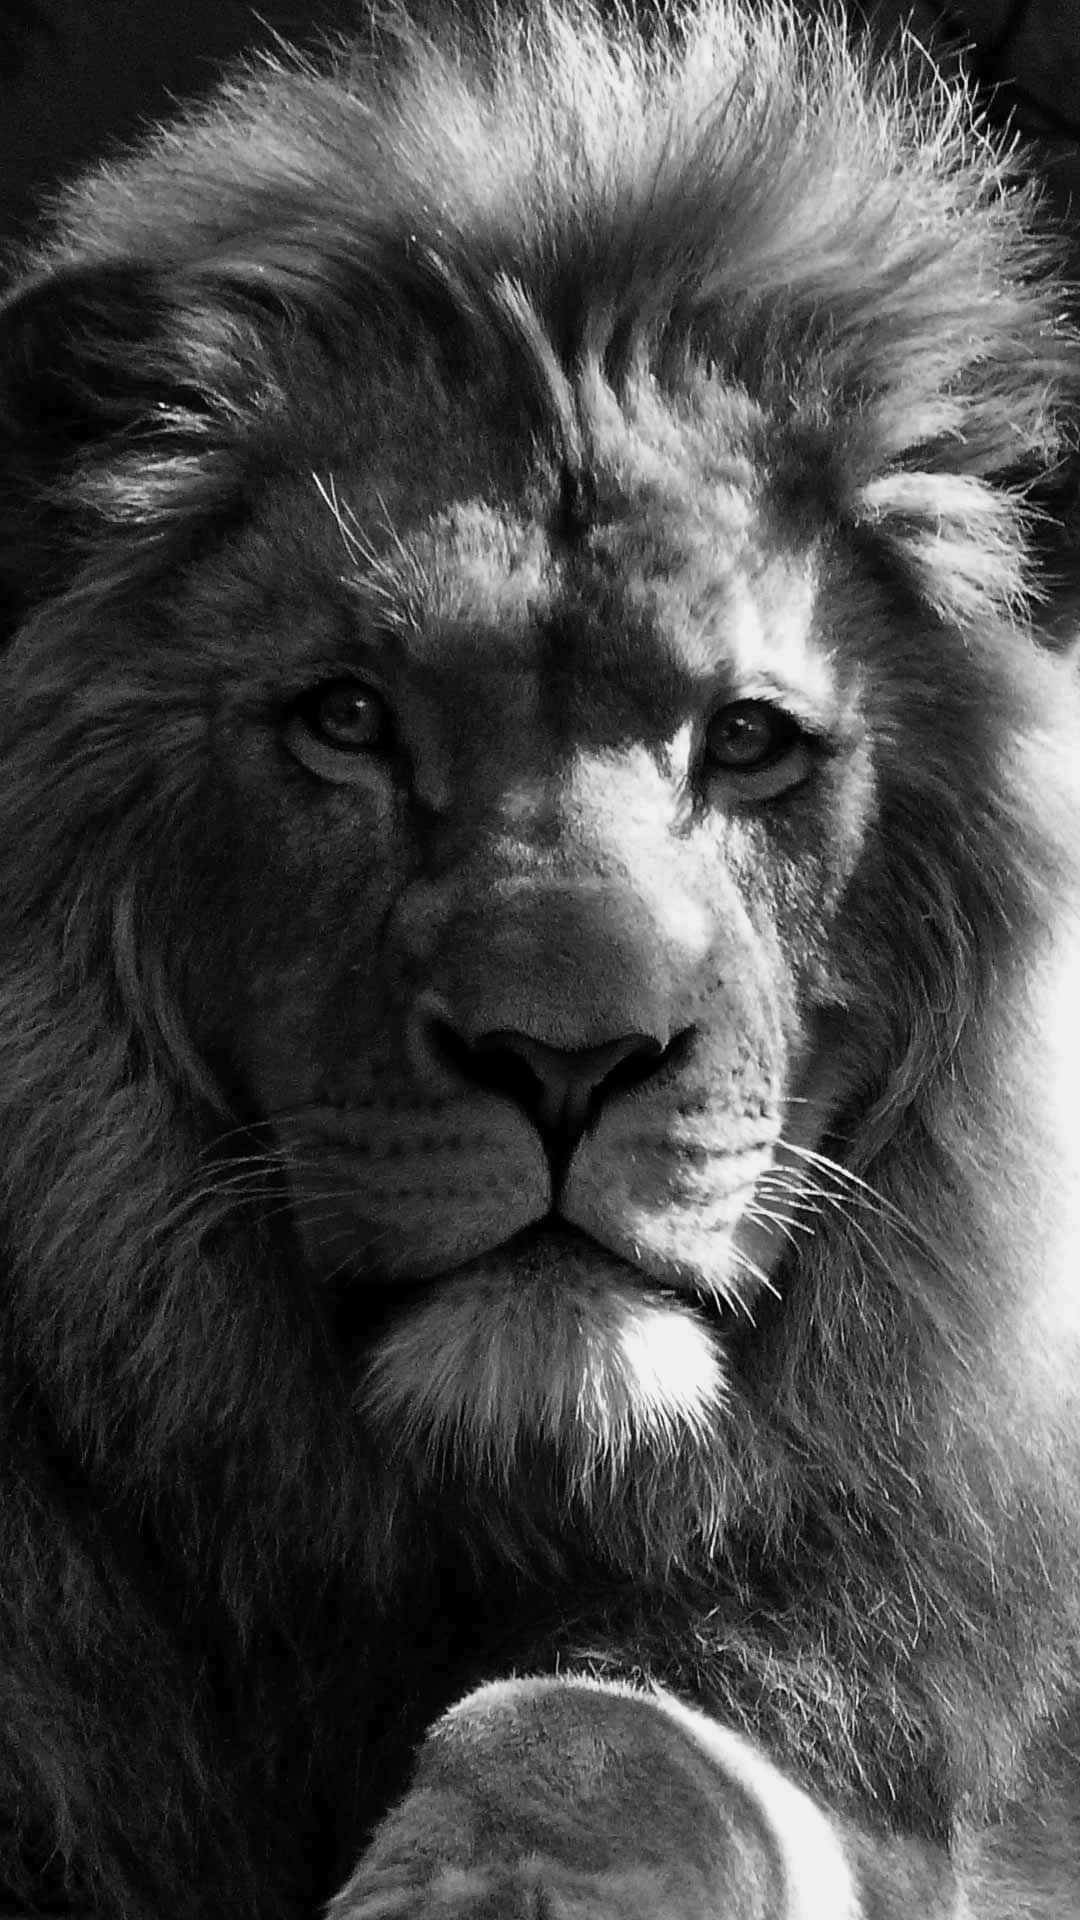 A black and white lion, a symbol of power and strength through adversity. Wallpaper